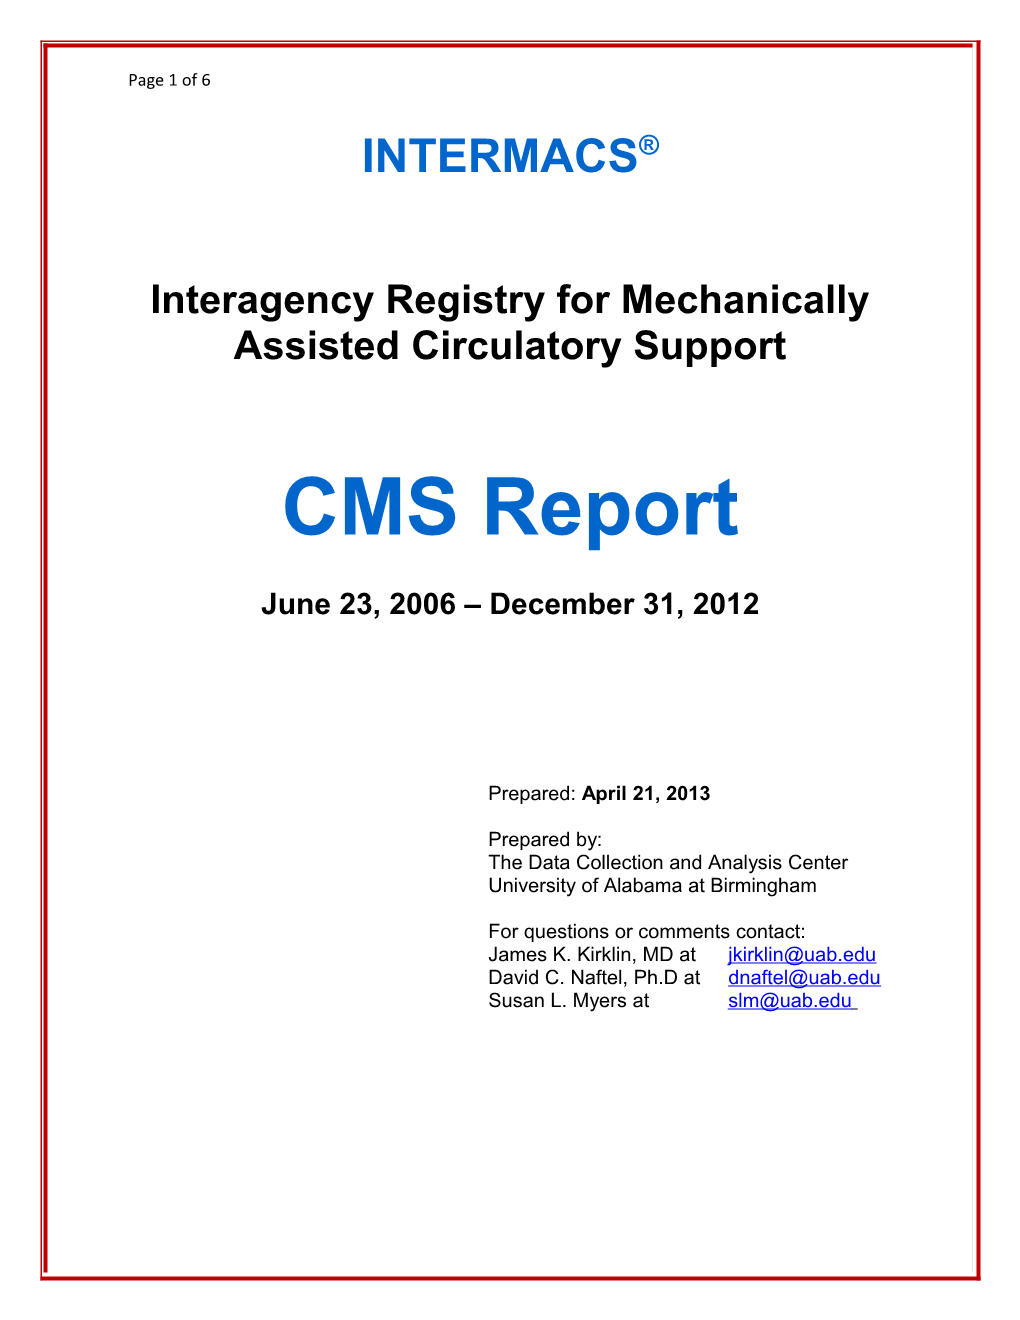 Interagency Registry for Mechanically Assisted Circulatory Support